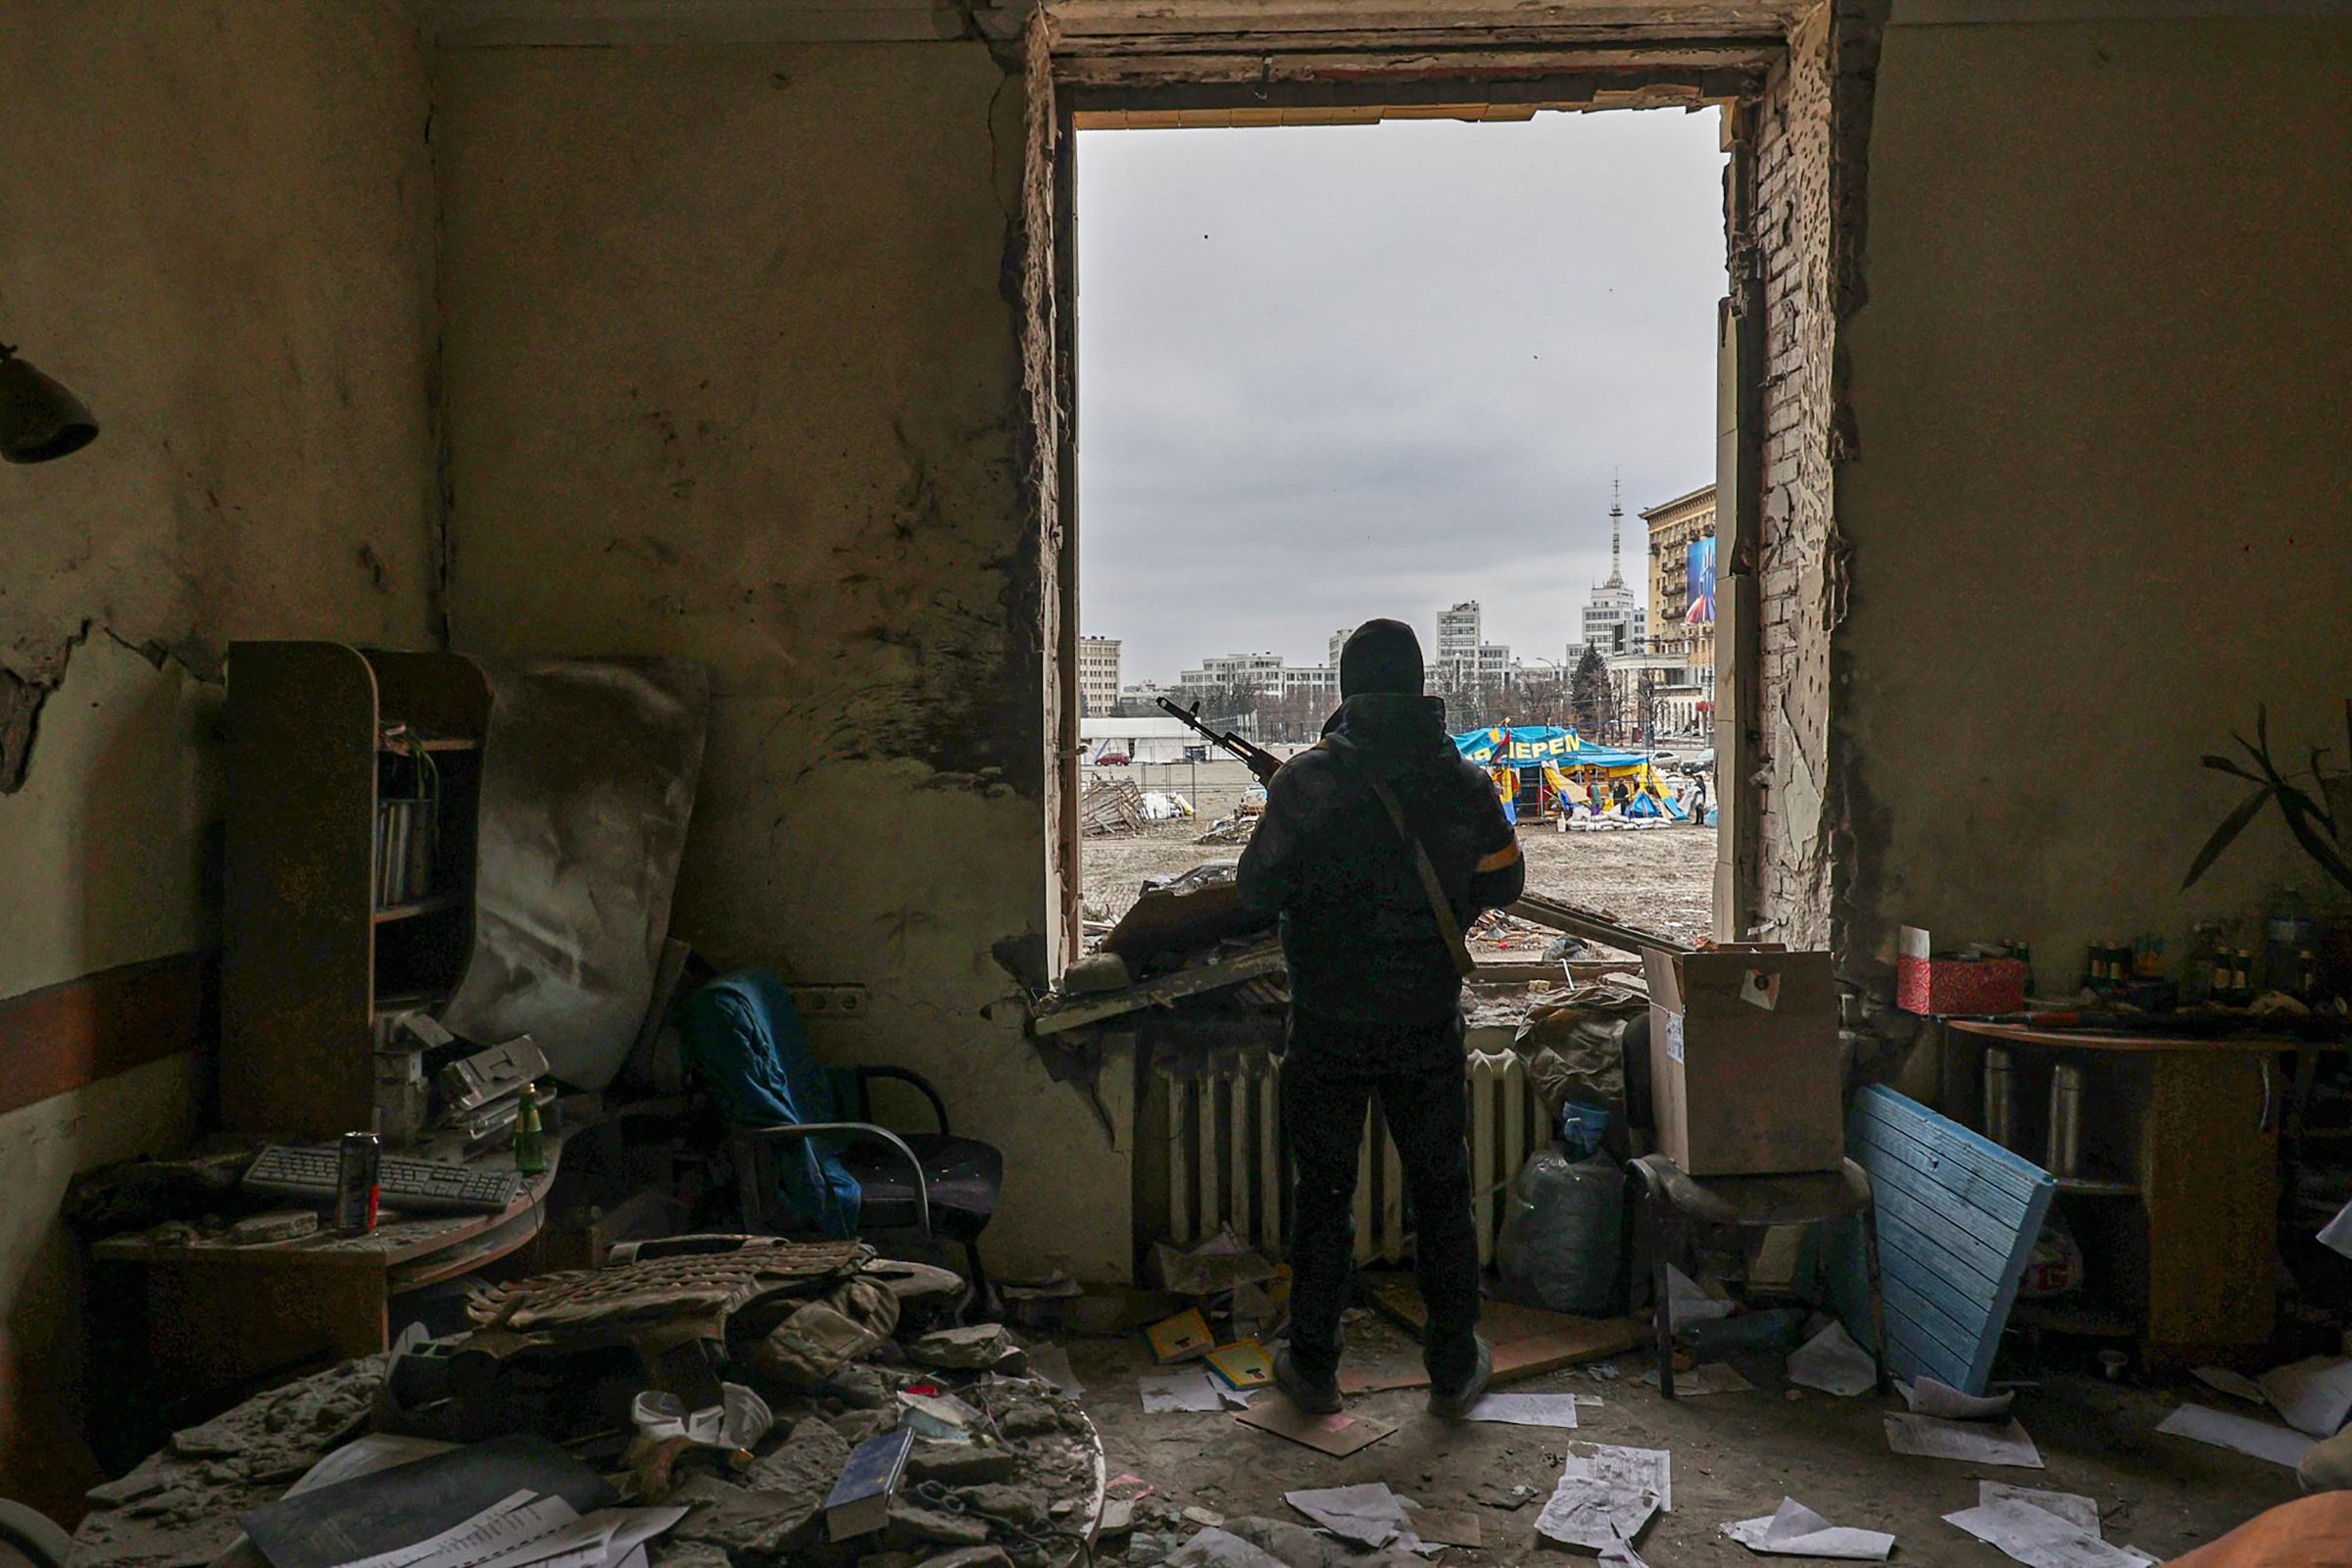 A member of the Territorial Defense Forces stands inside the damaged Kharkiv regional administration building in the aftermath of a shelling in downtown Kharkiv on March 1. (Sergey Kozlov—EPA-EFE/Shutterstock)